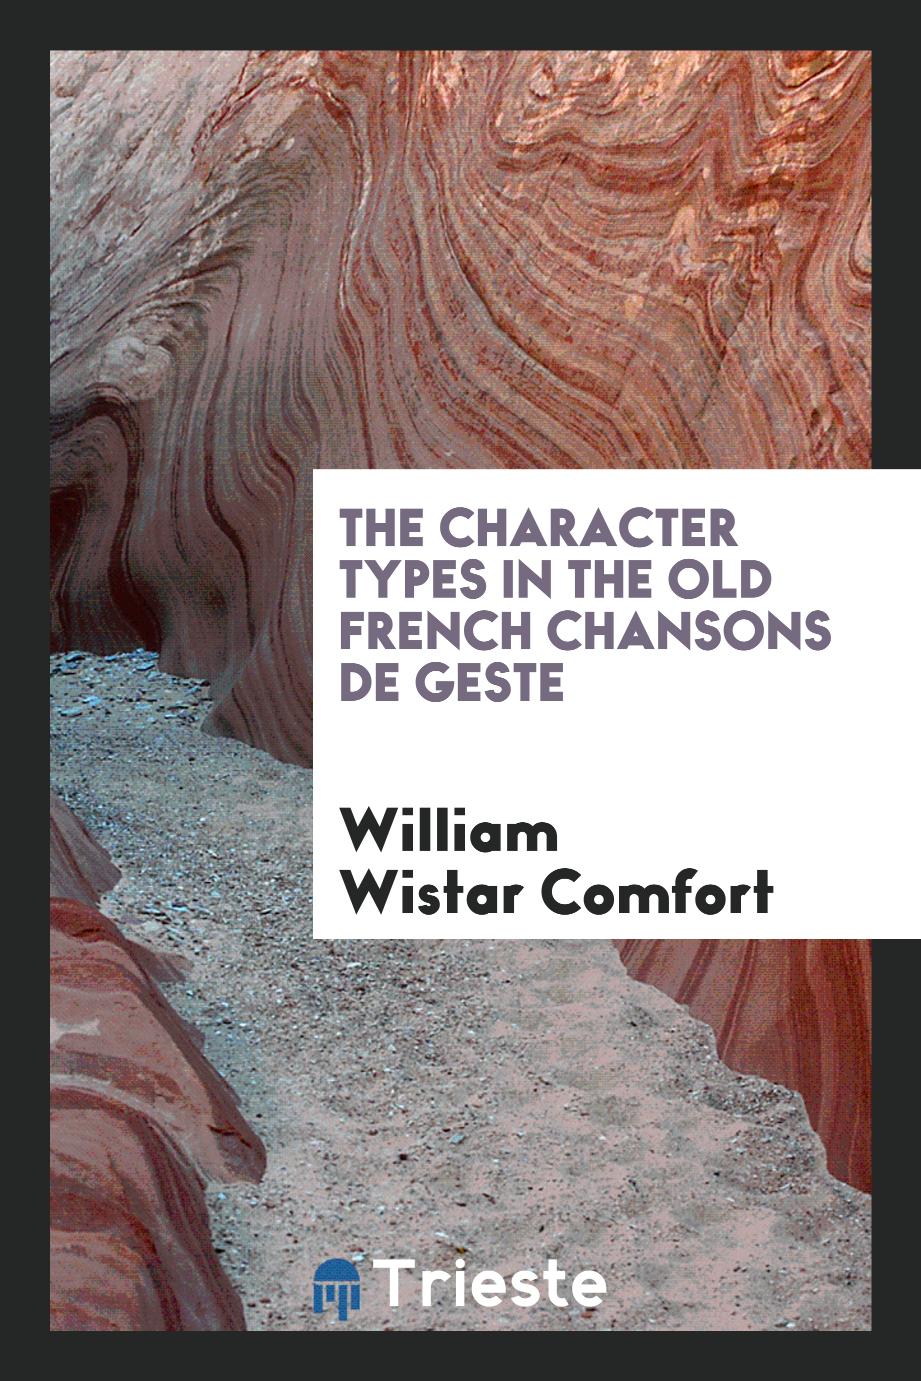 The Character Types in the Old French Chansons de Geste